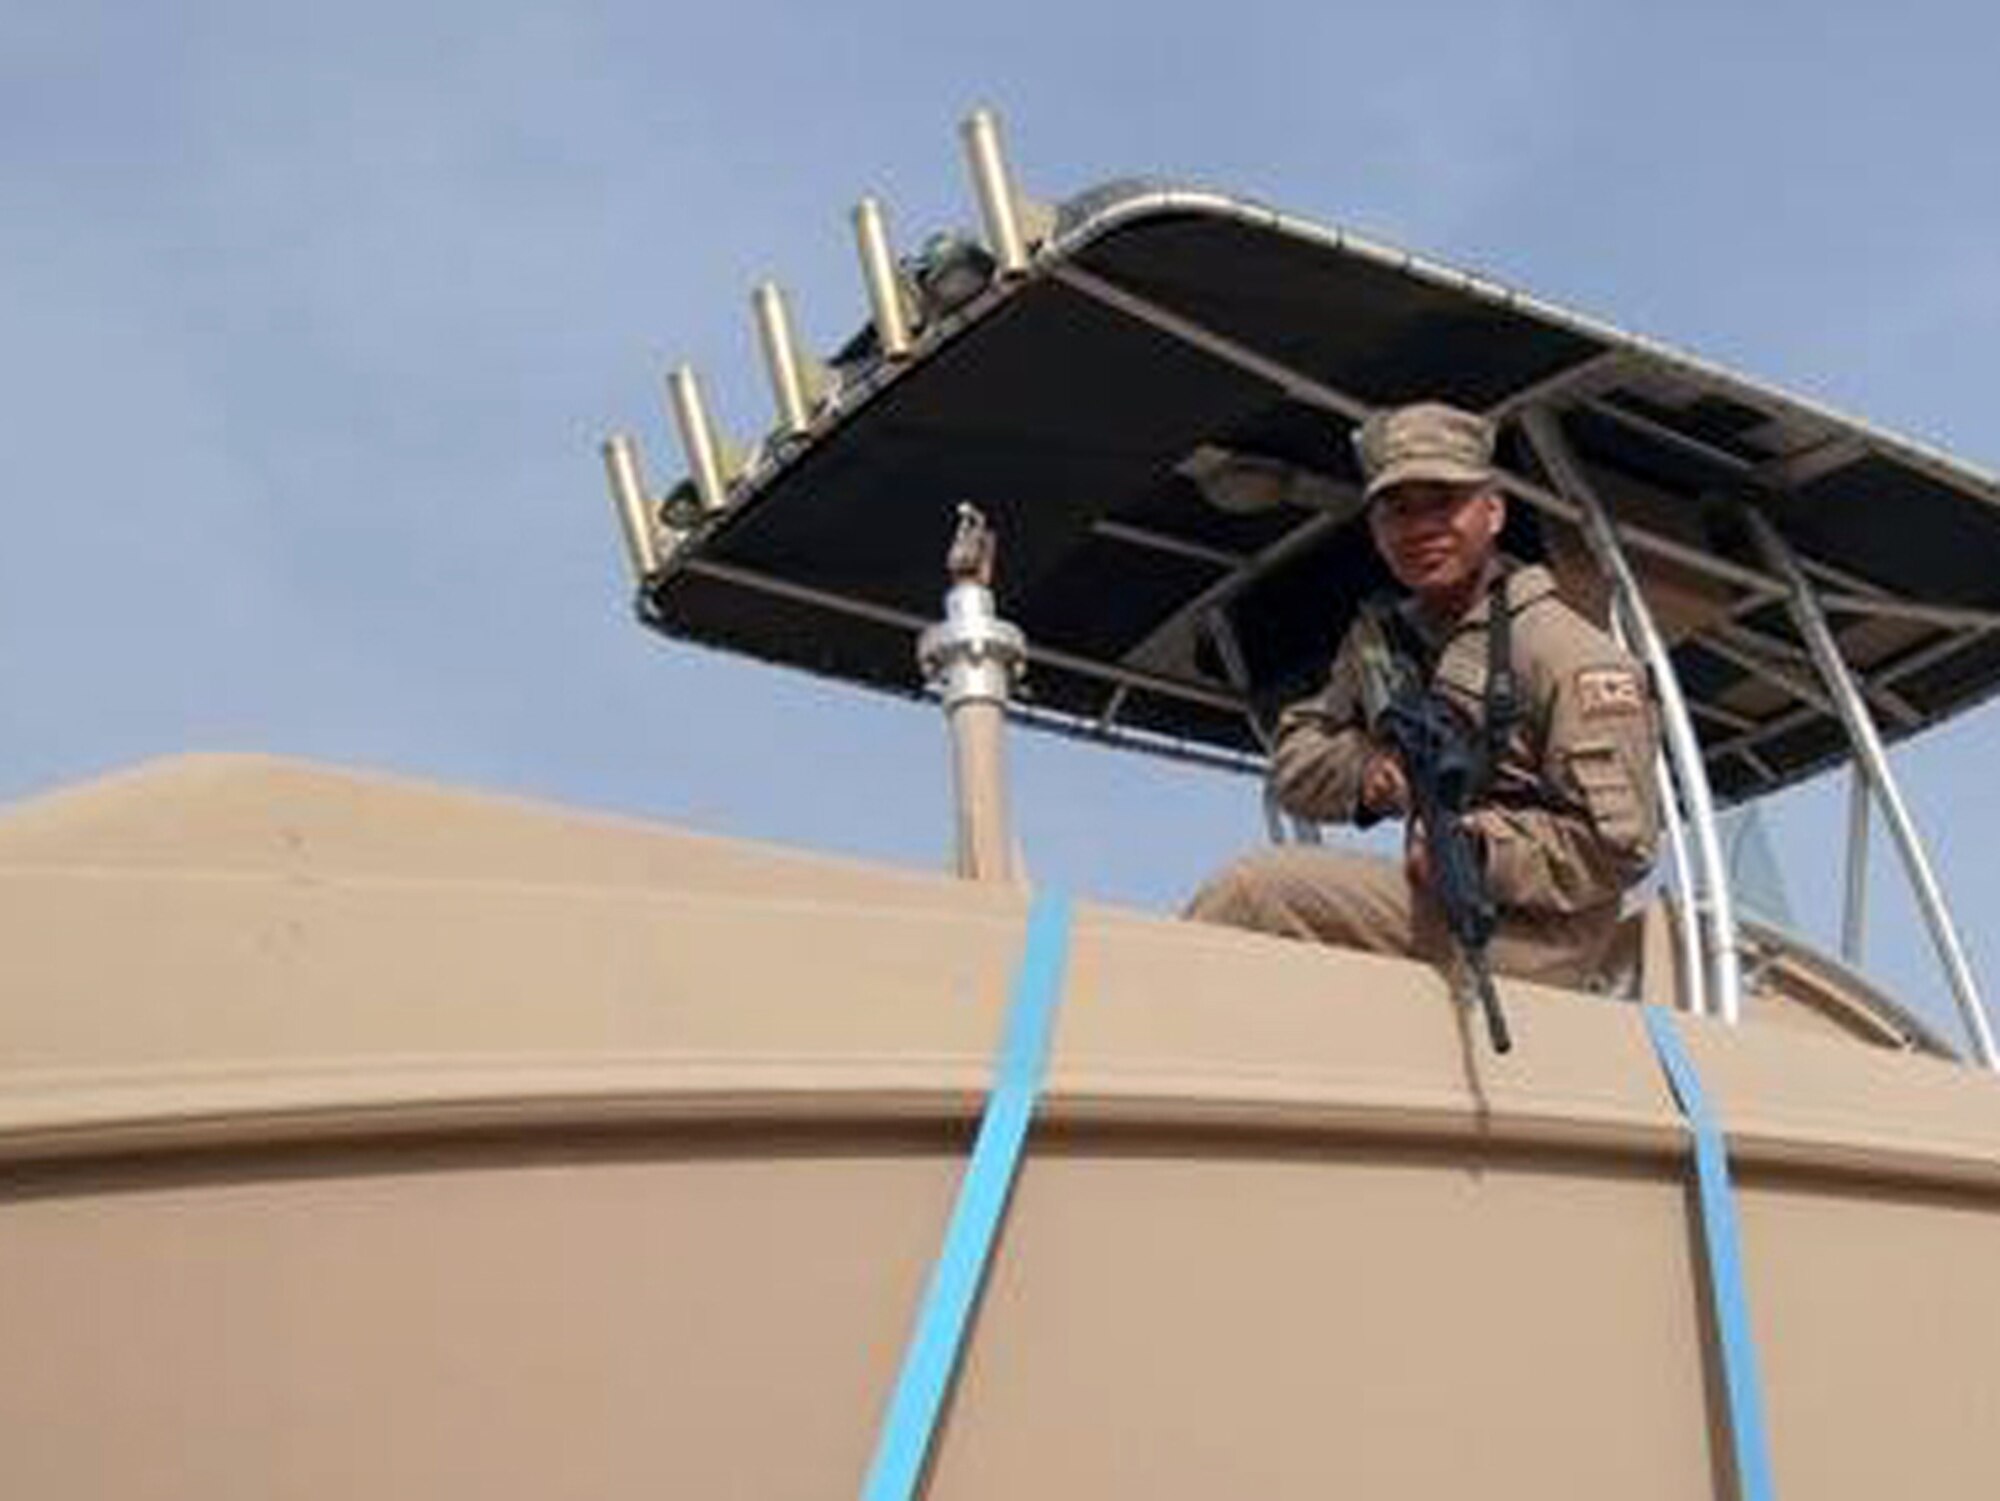 CAMP ARFIJAN, Kuwait – Senior Airman Joseph Adams, 424th Medium Truck Detachment, uploads and ties down a boat on to a trailer as he prepares to depart for a convoy mission.  Airman Adams is deployed to Camp Arfijan, Kuwait, from the 509th Logistics Readiness Squadron as a truck commander.   